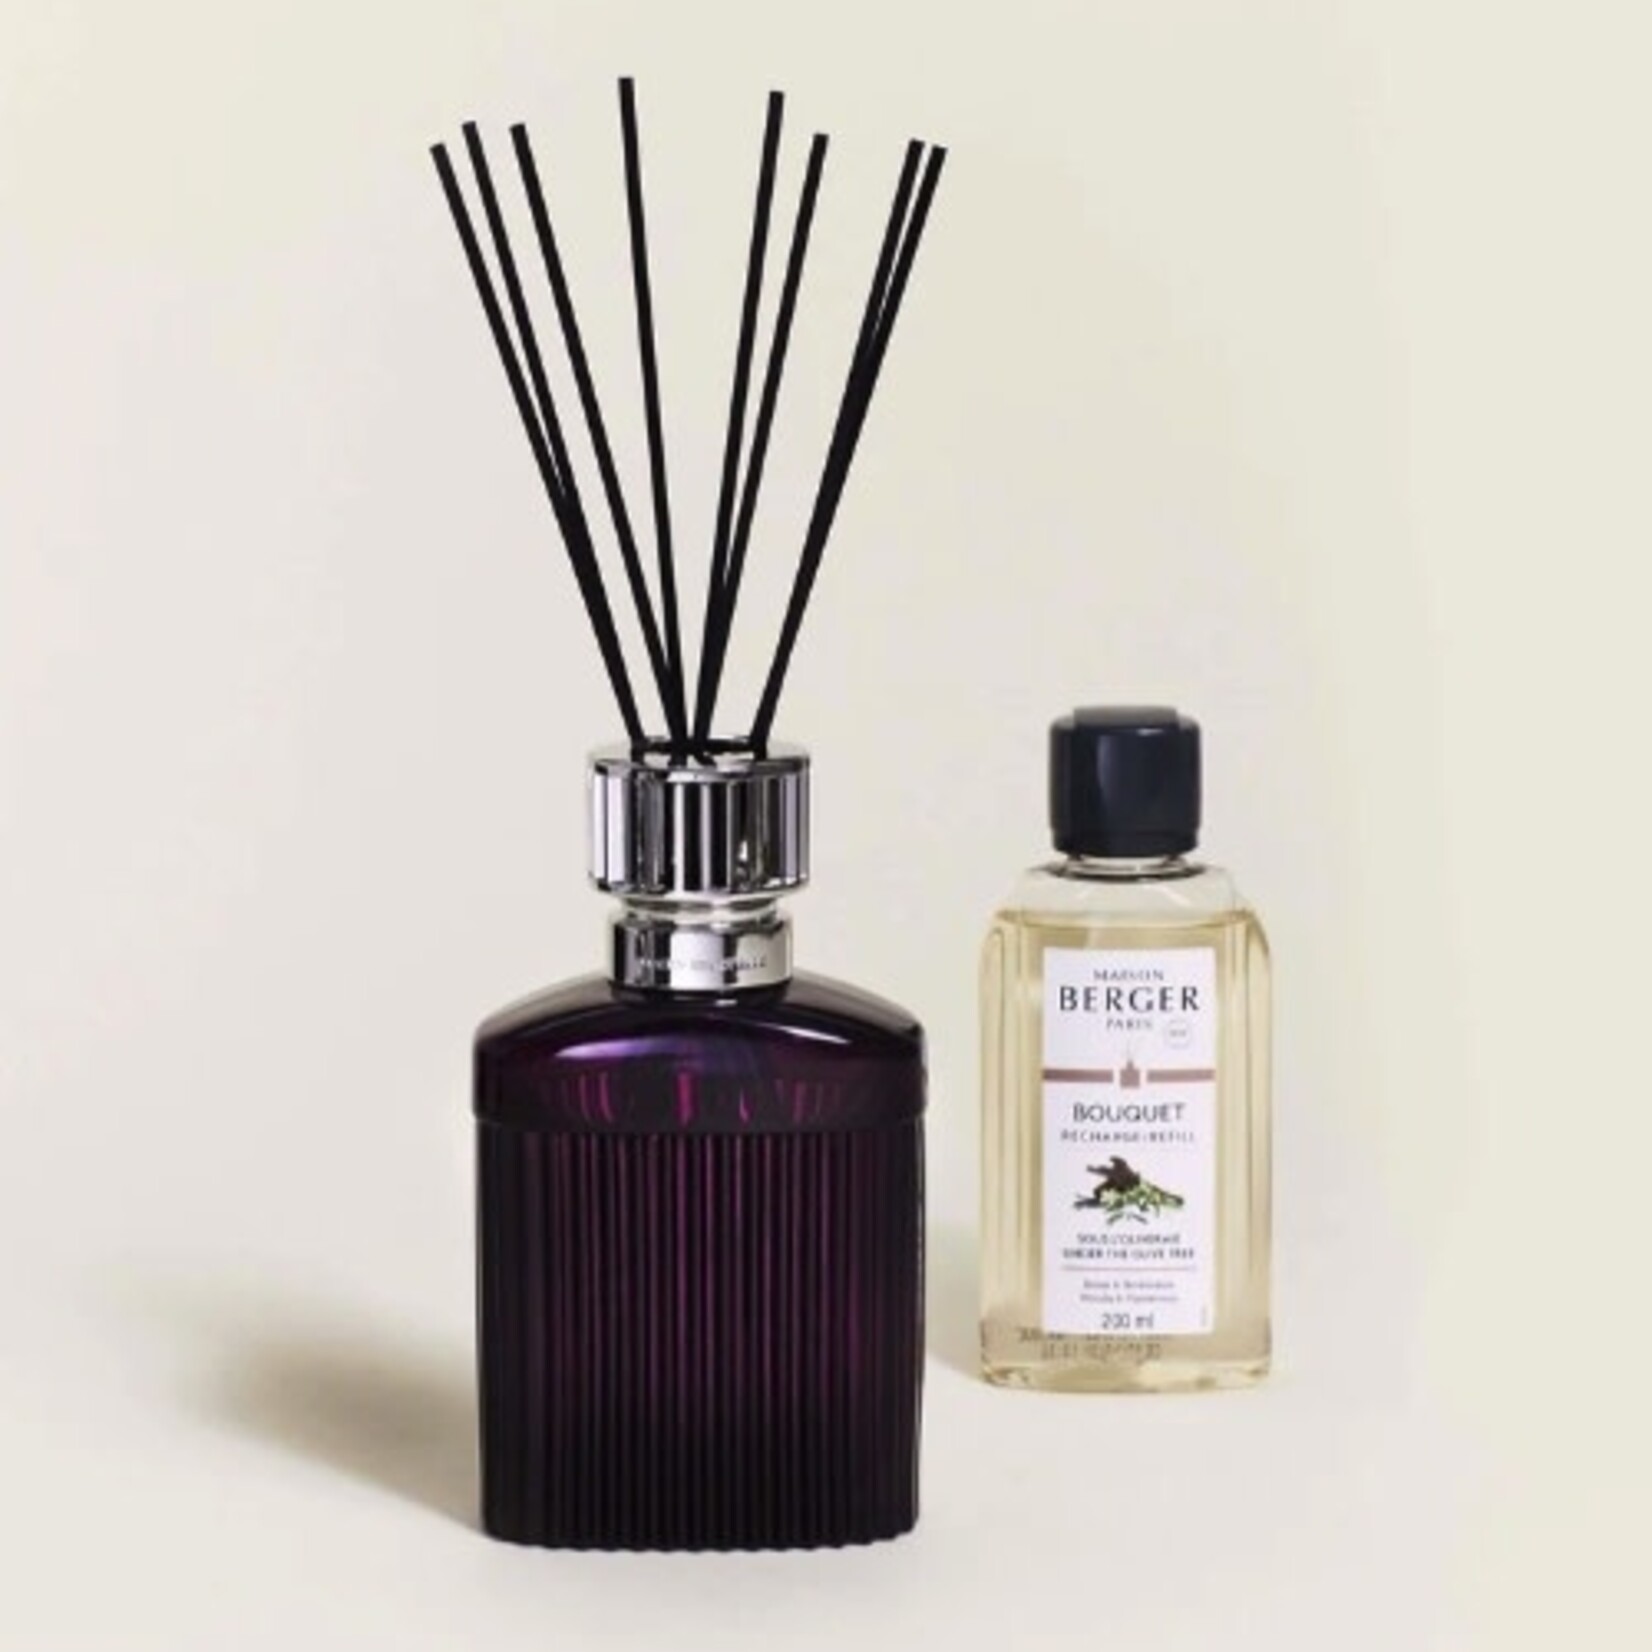 Maison Berger Paris Alpha Scandalous Reed Diffuser Gift Set with Under the Olive Tree - Plum